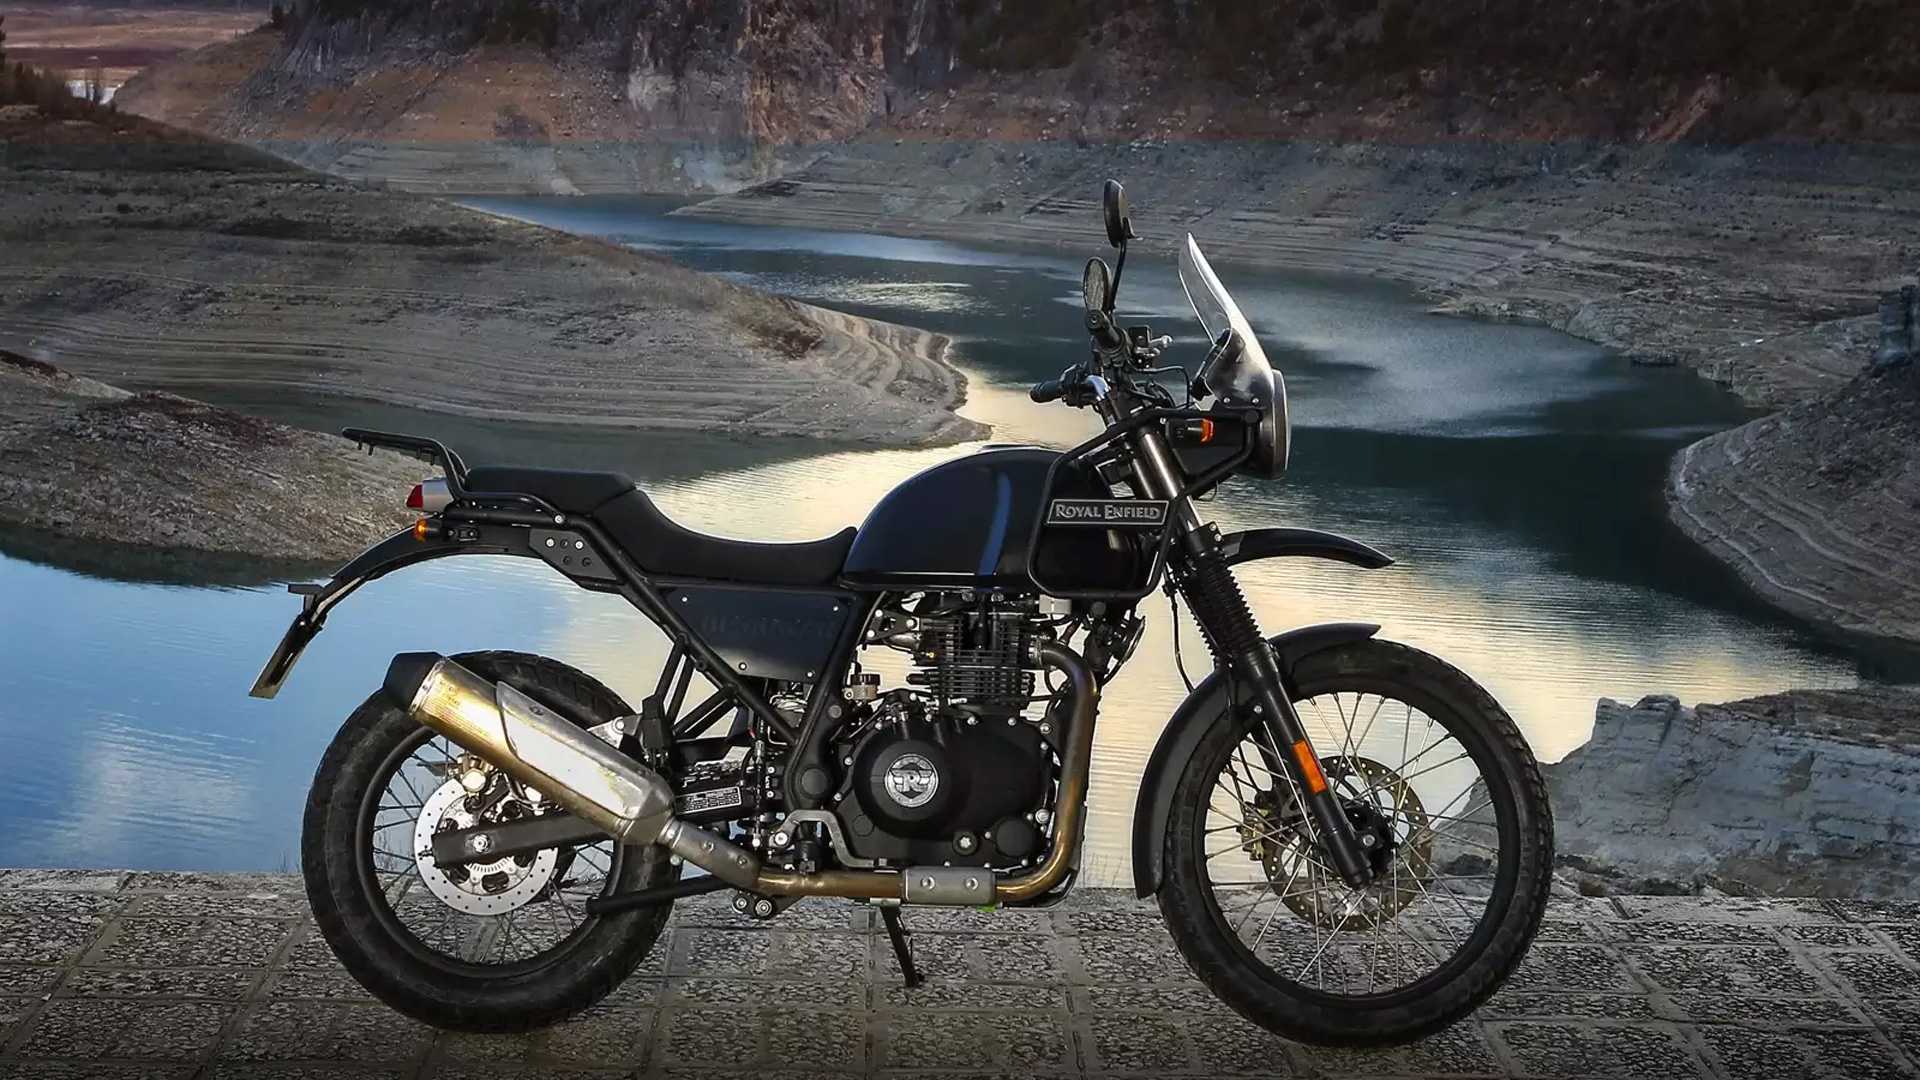 Surfside Himalayan 650 Twin - Return of the Cafe Racers